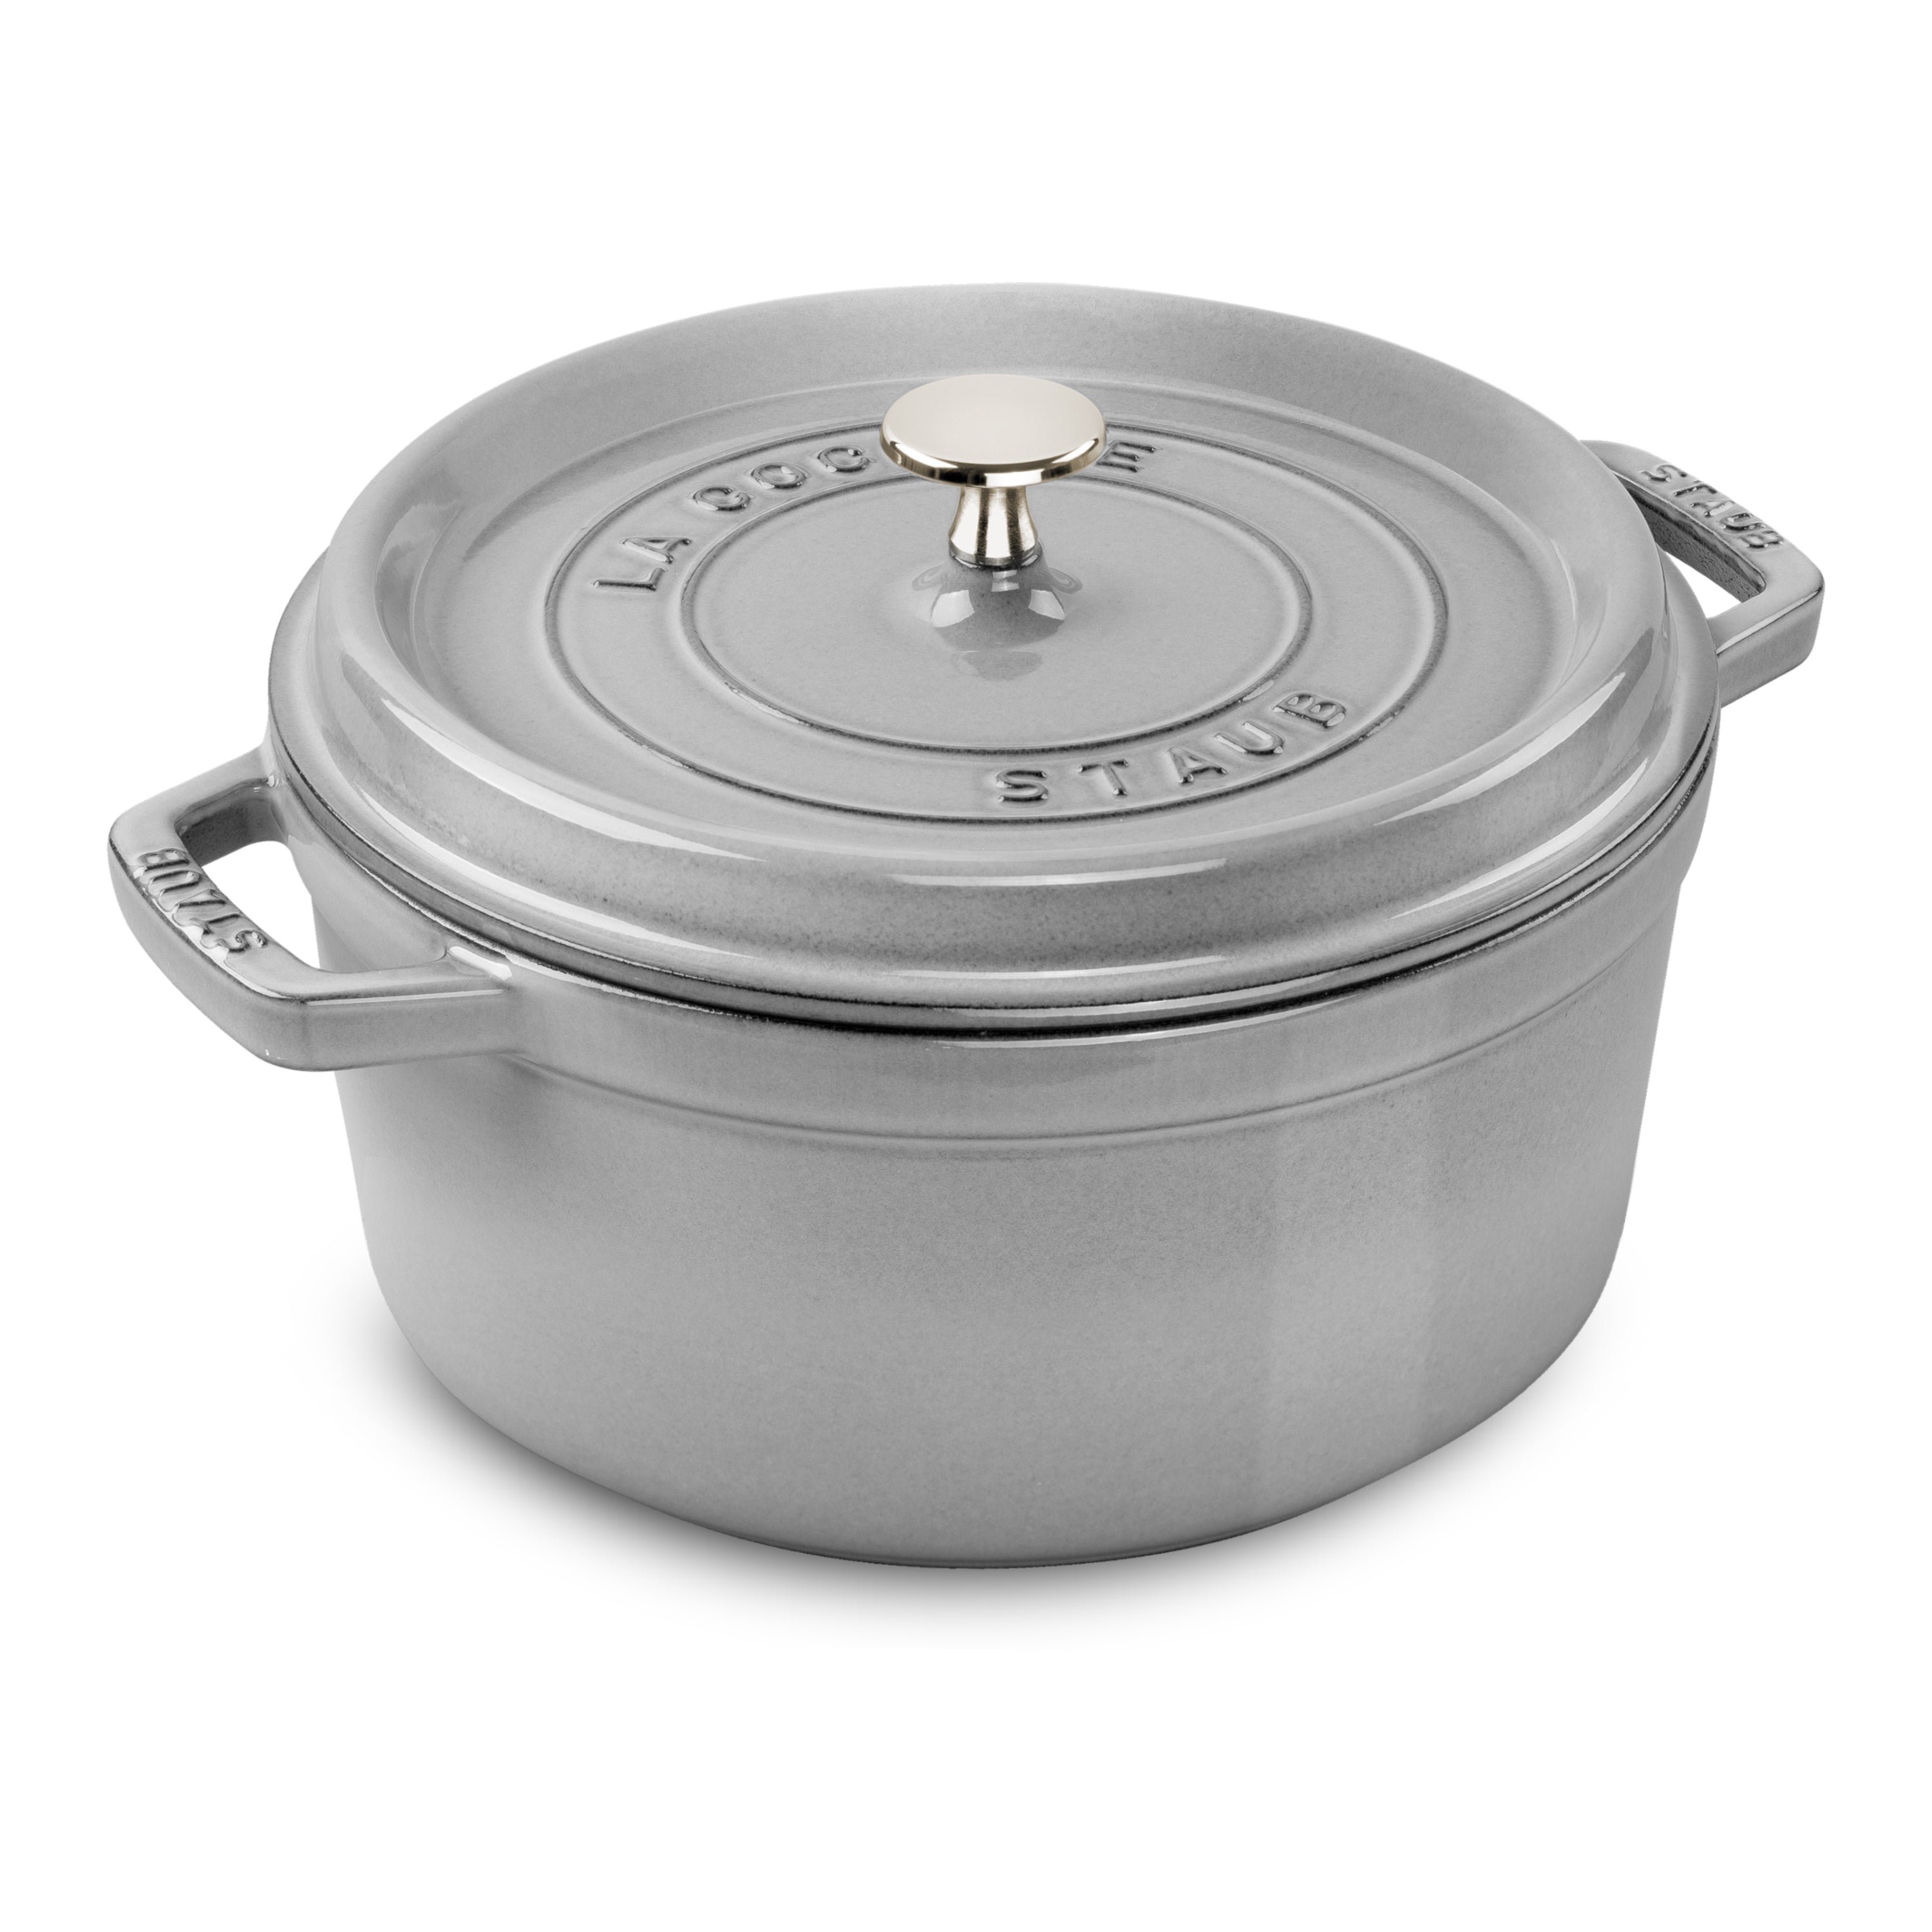 Staub Dutch Oven: Get this heart-shaped model for more than $100 off